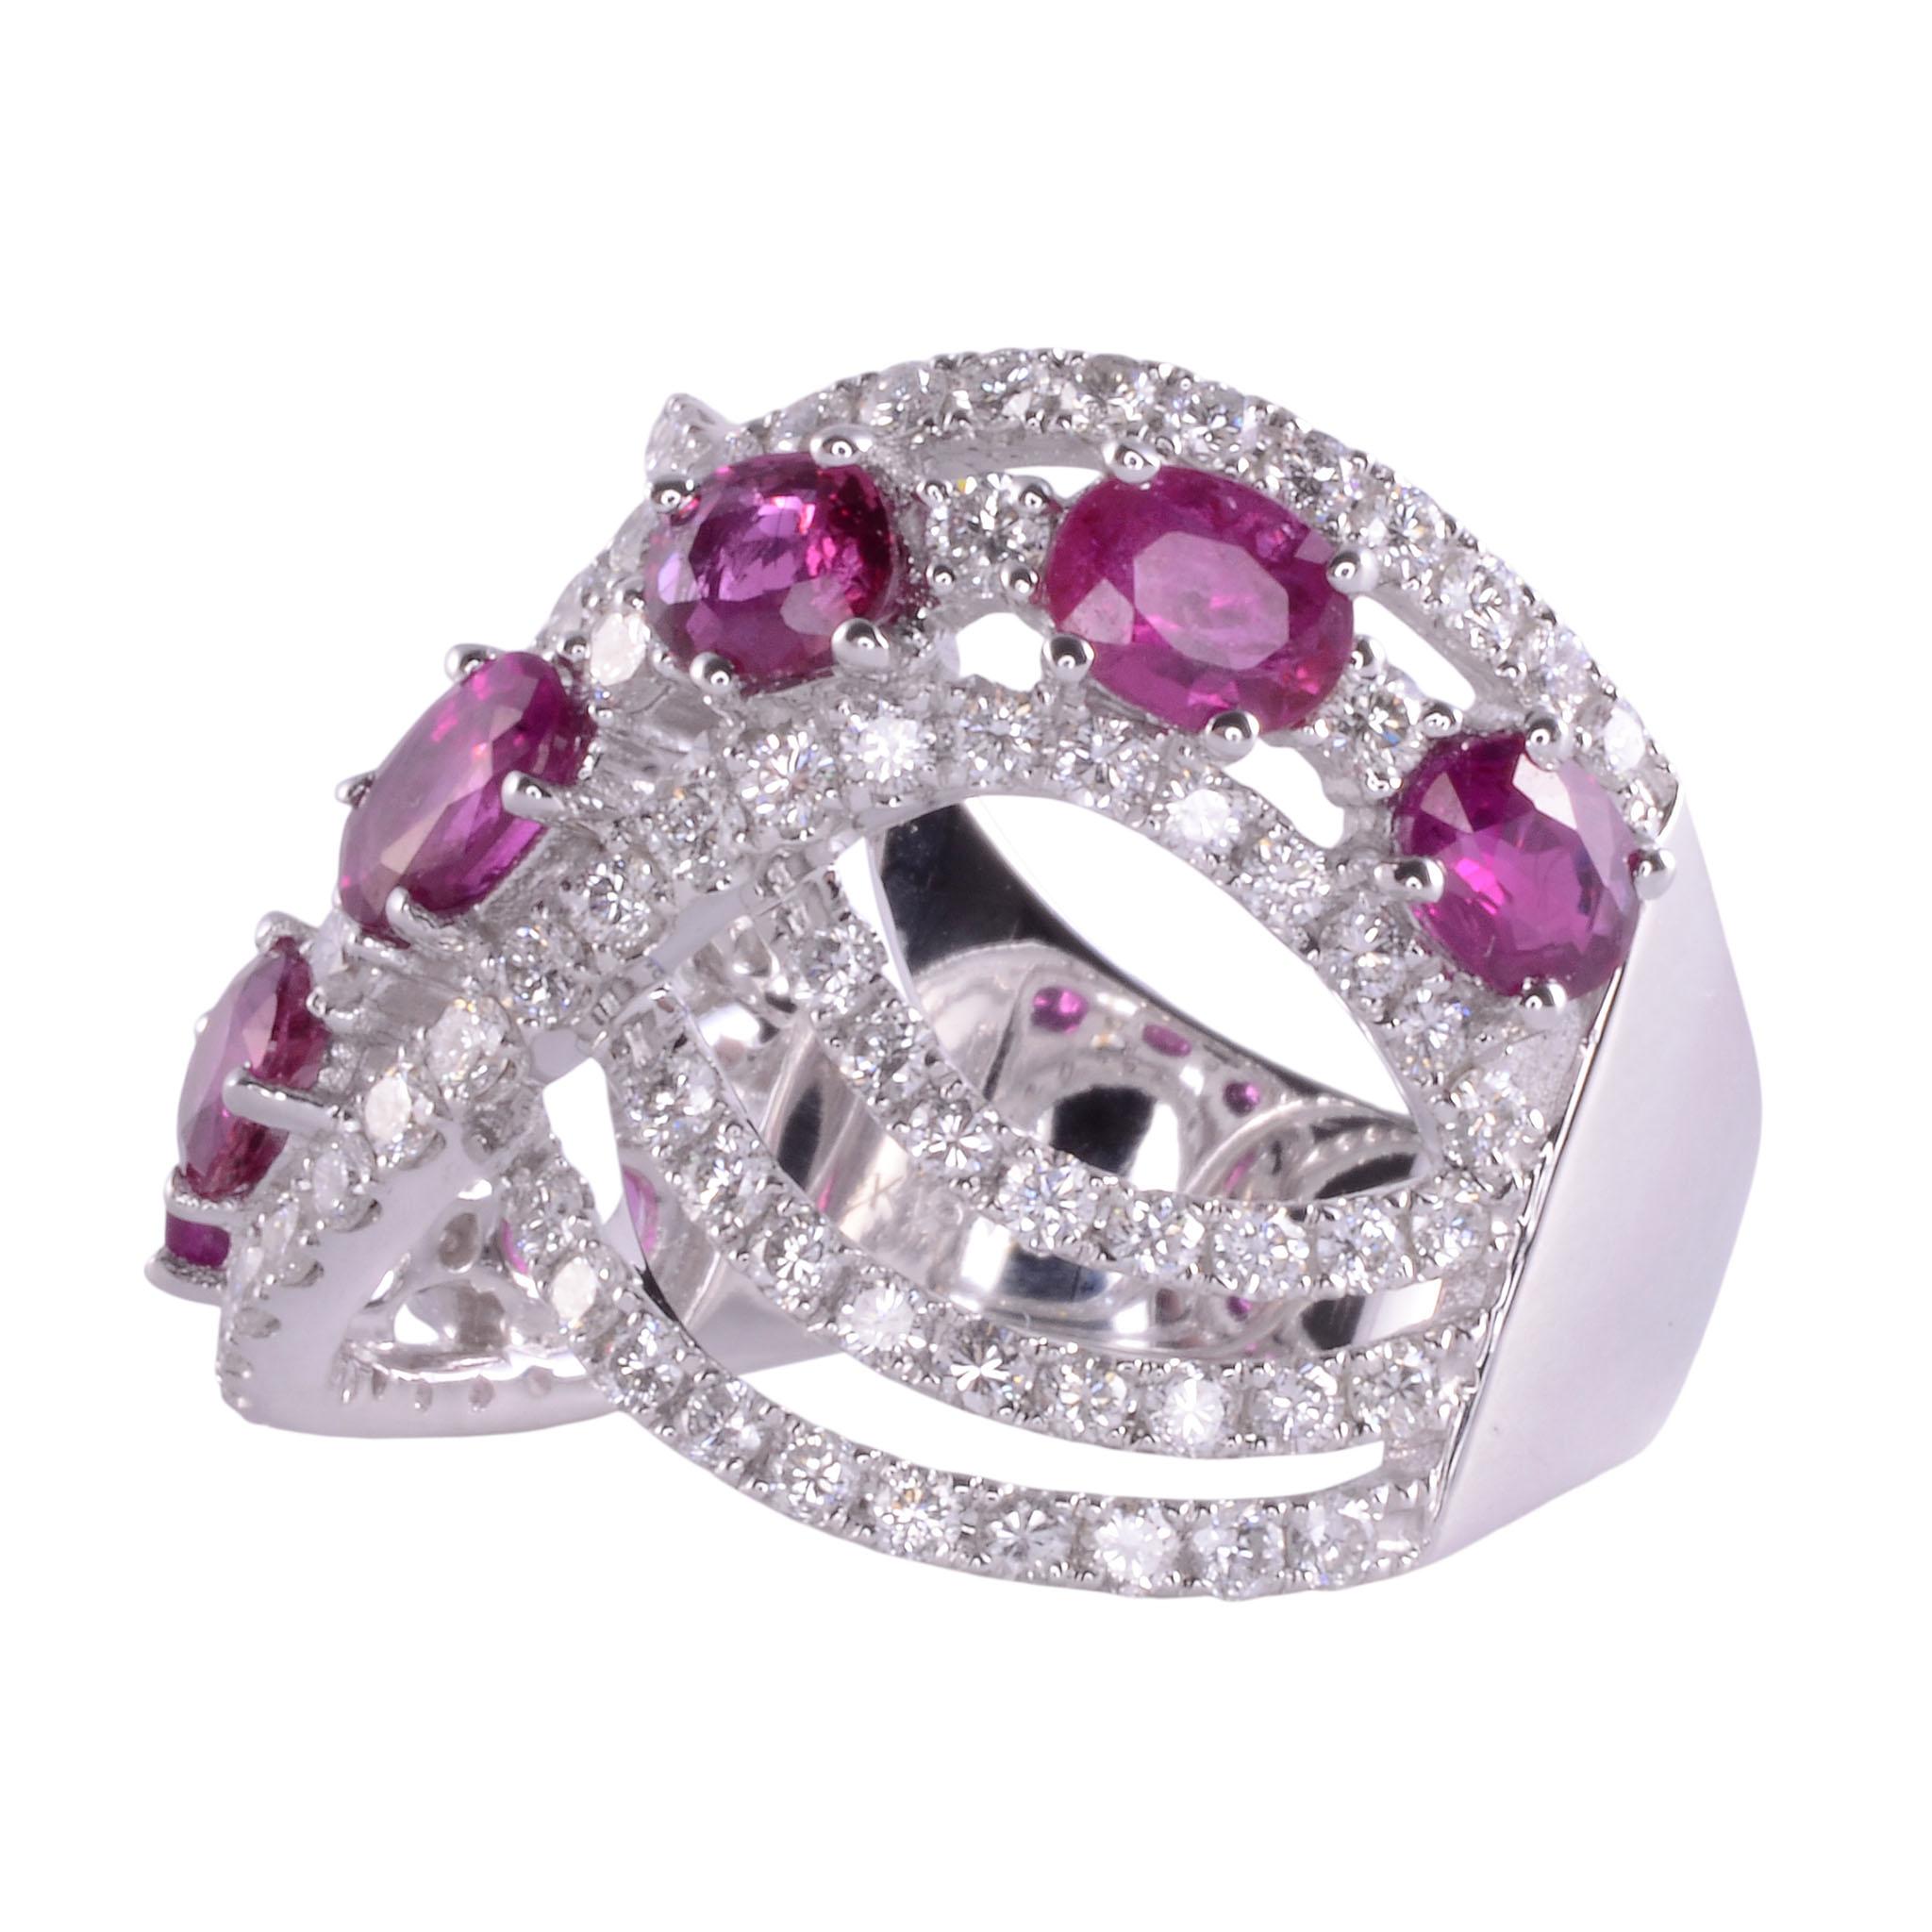 Estate ruby & diamond 18KW wide ring. This 18 karat white gold ring features seven oval rubies at 2.06 carat total weight. The rubies are accented with 1.29 carats of round brilliant diamonds having VS clarity and G-H color. This ruby ring weighs